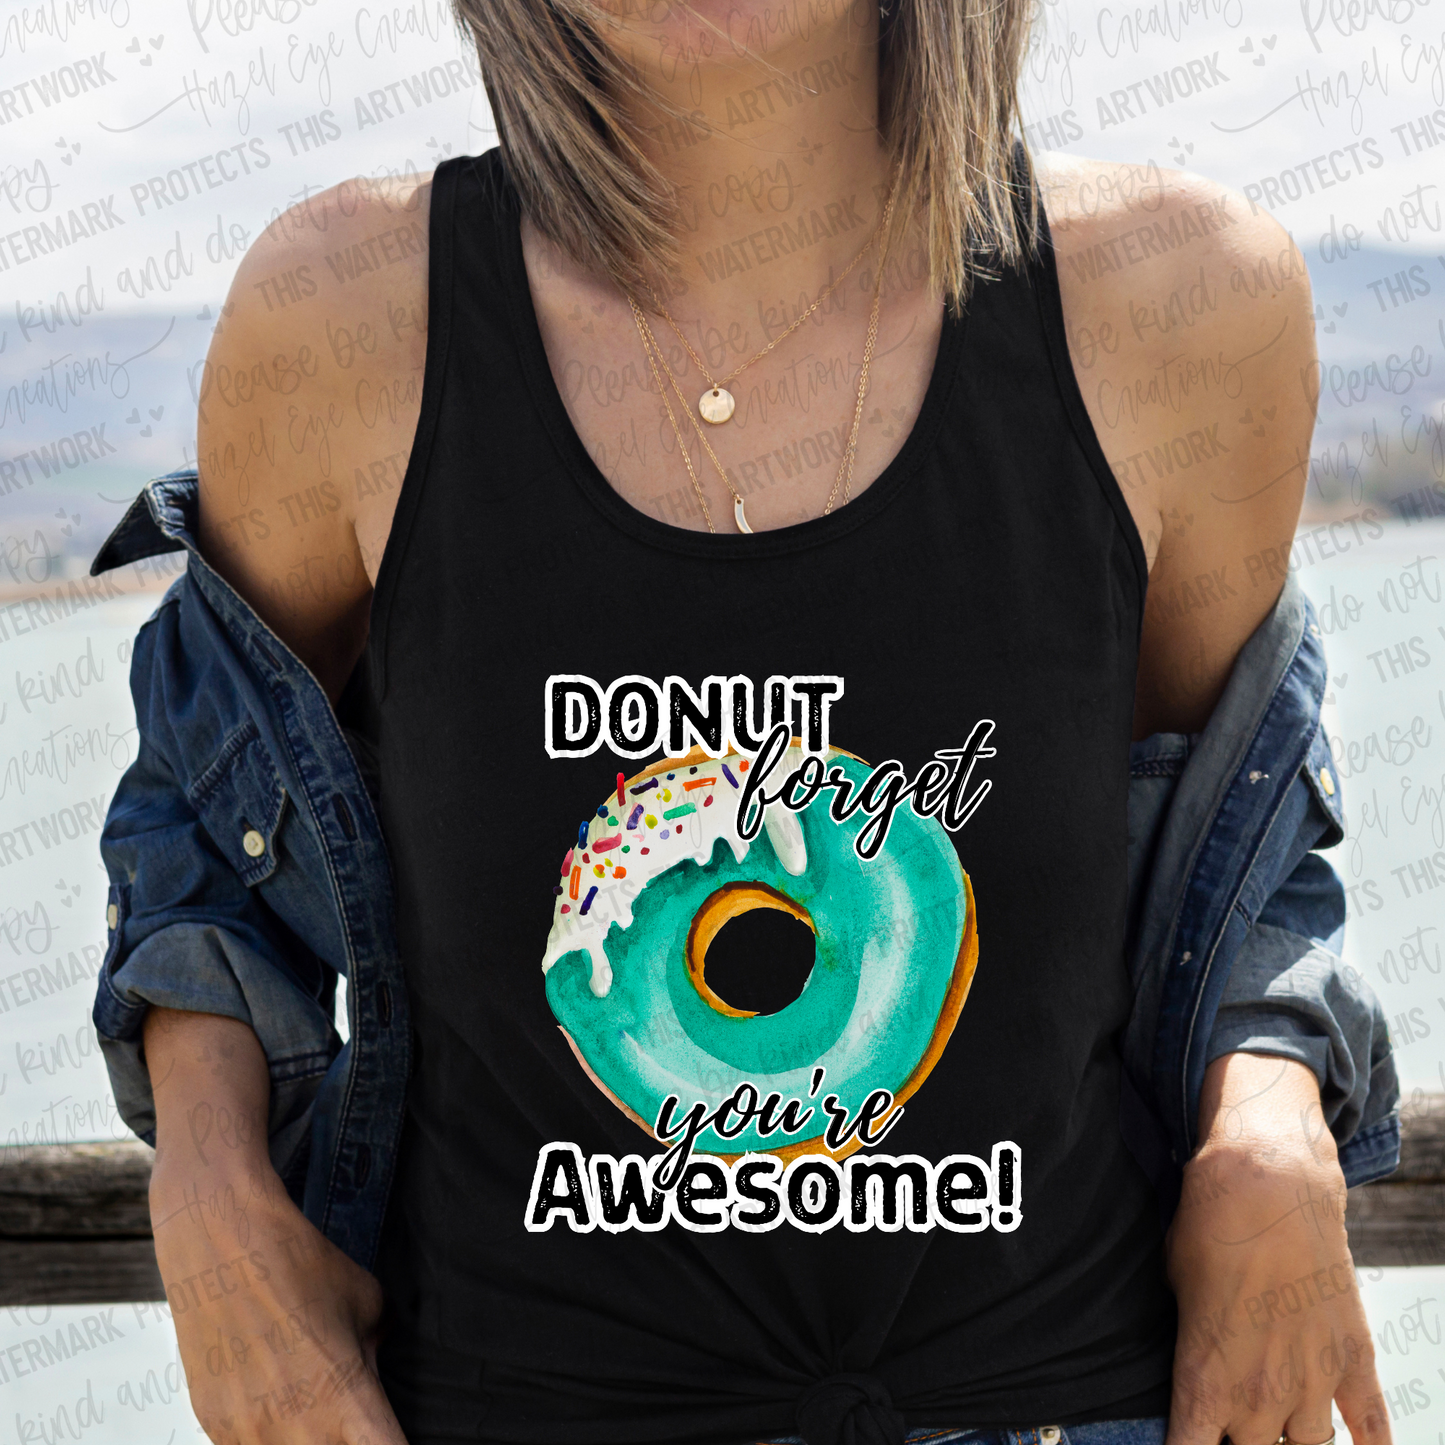 Donut forget you're awesome